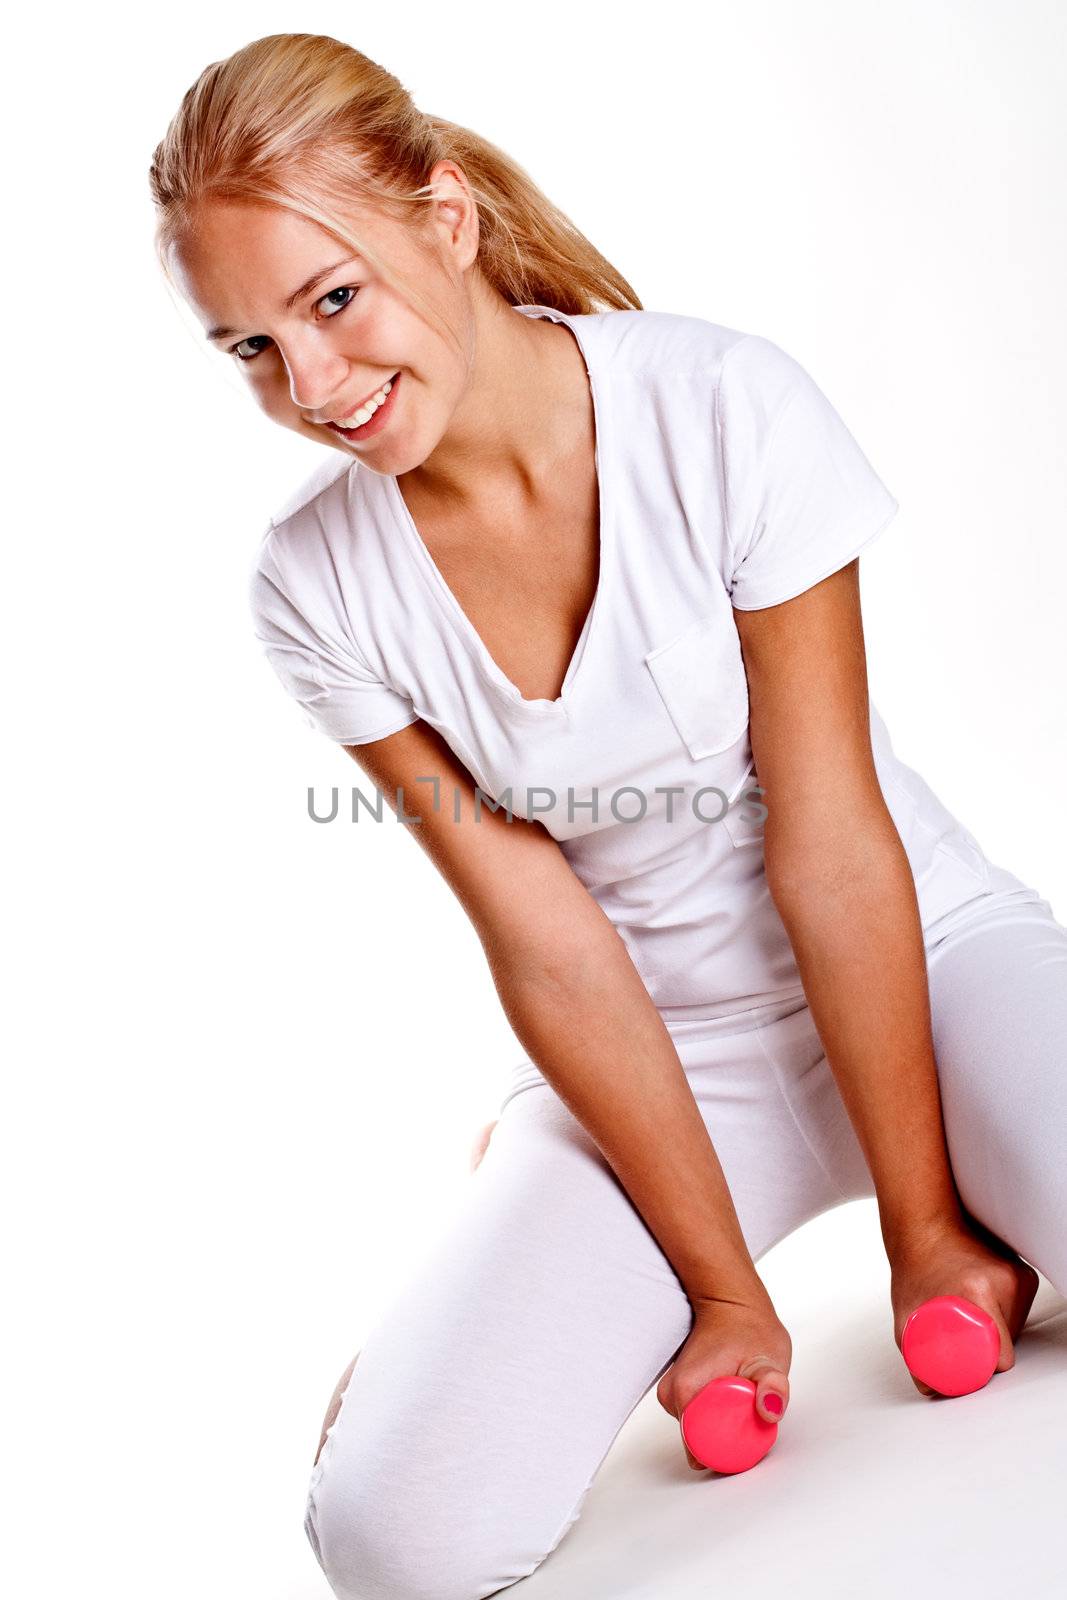 pink dumbbells in the hands of women on a white background